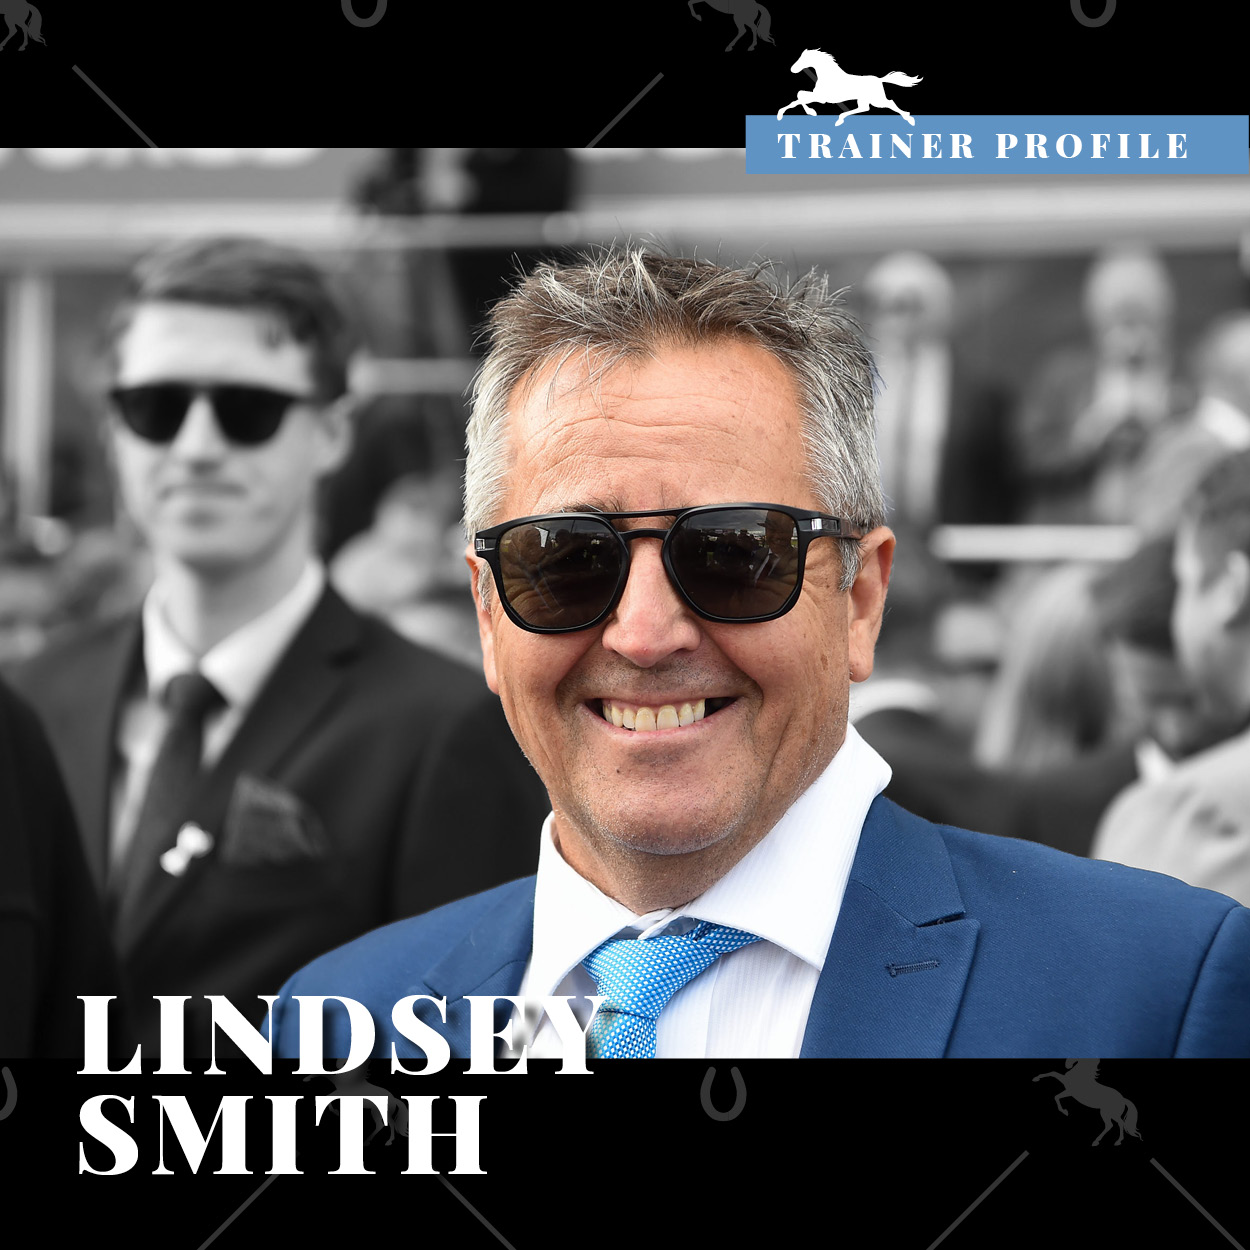 Trainer Profile – Lindsey Smith